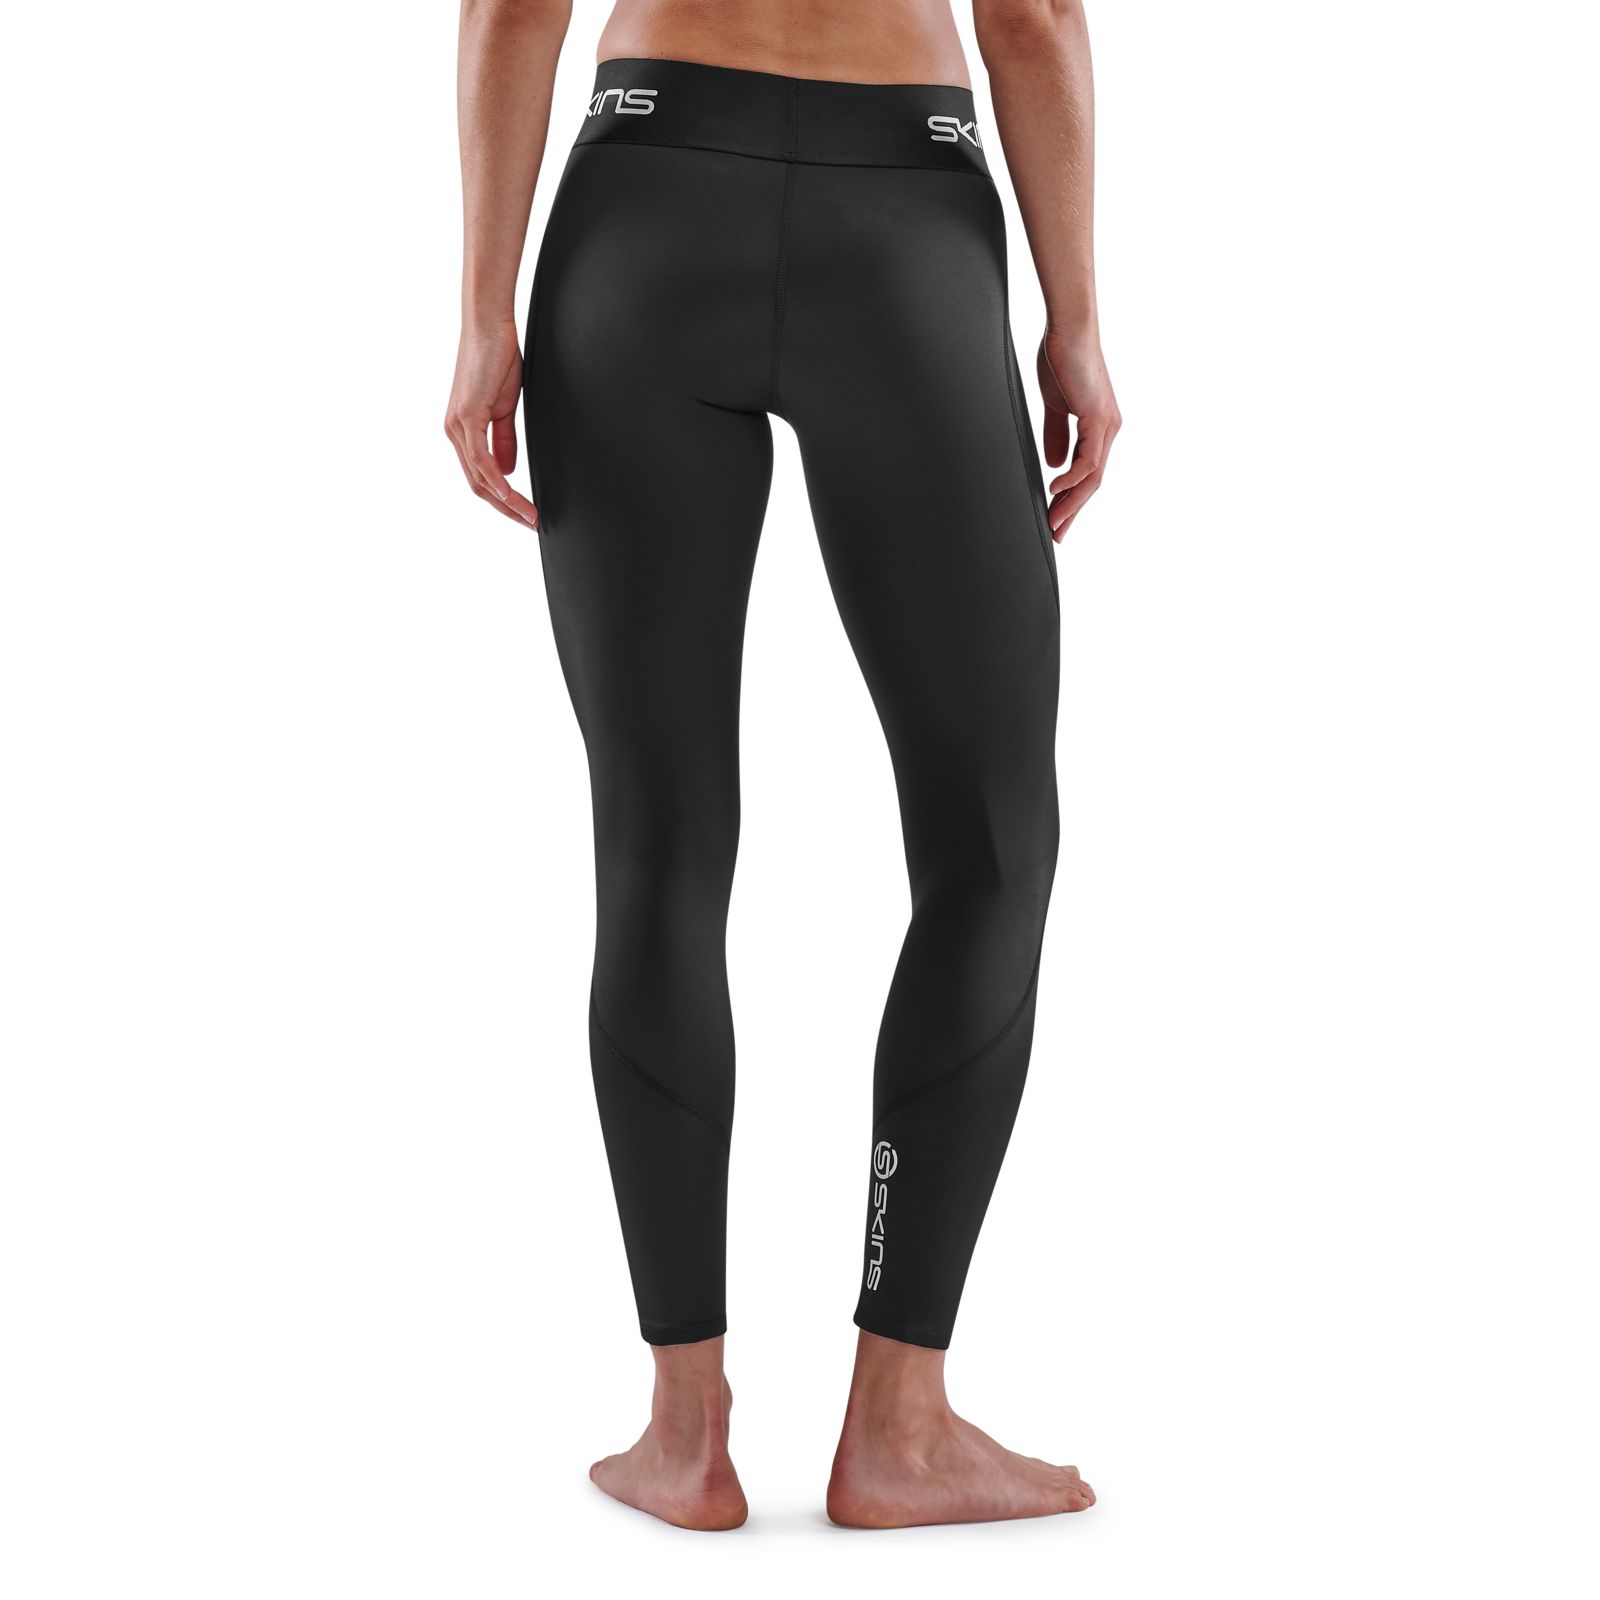 RUNNING/TRAIL CLOTHING & EQUIPMENT Skins DNAMIC ULTIMATE - 7/8 Tights -  Women's - black - Private Sport Shop